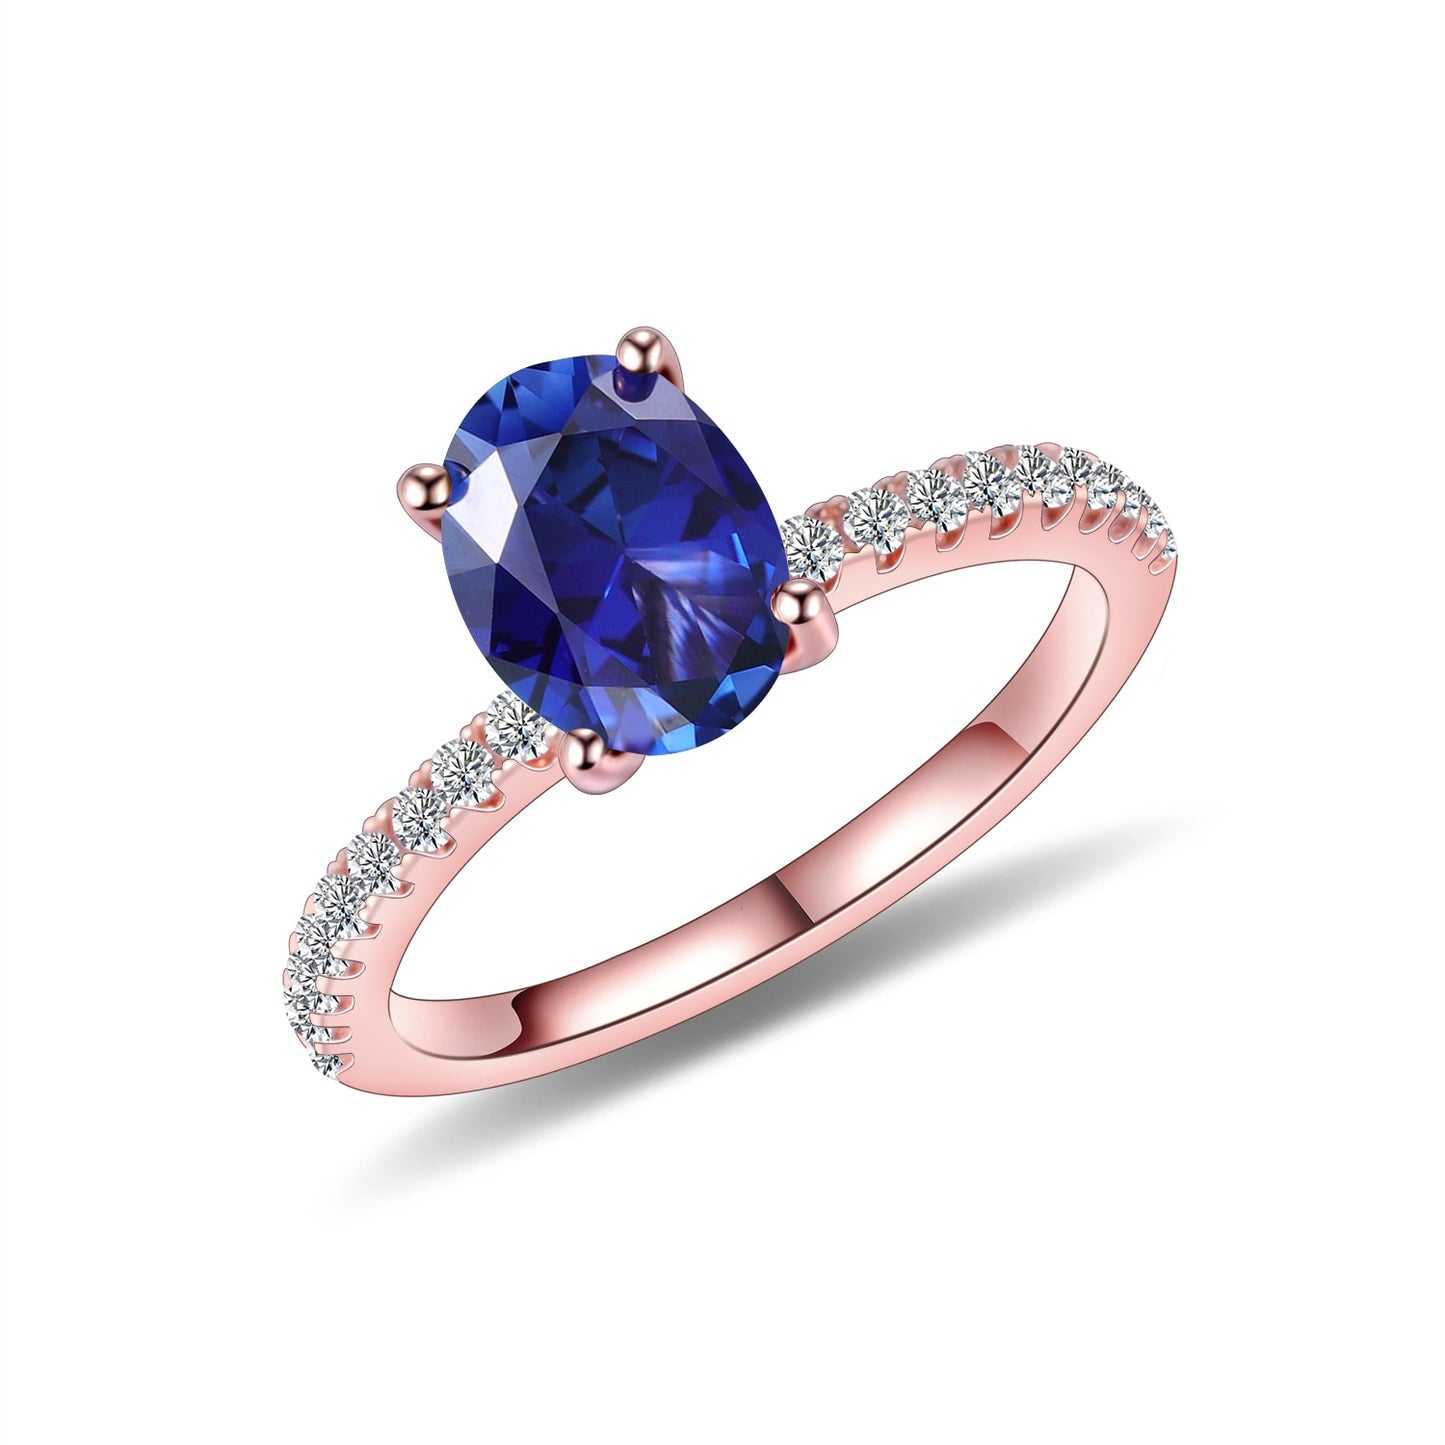 GEM'S BALLET Vintage Oval 8X10mm Lab Blue Sapphire Engagement Ring 925 Sterling Silver Rose Gold Rings Birthstone Jewelry lab Blue Sapphire -R|OV 8X10mm